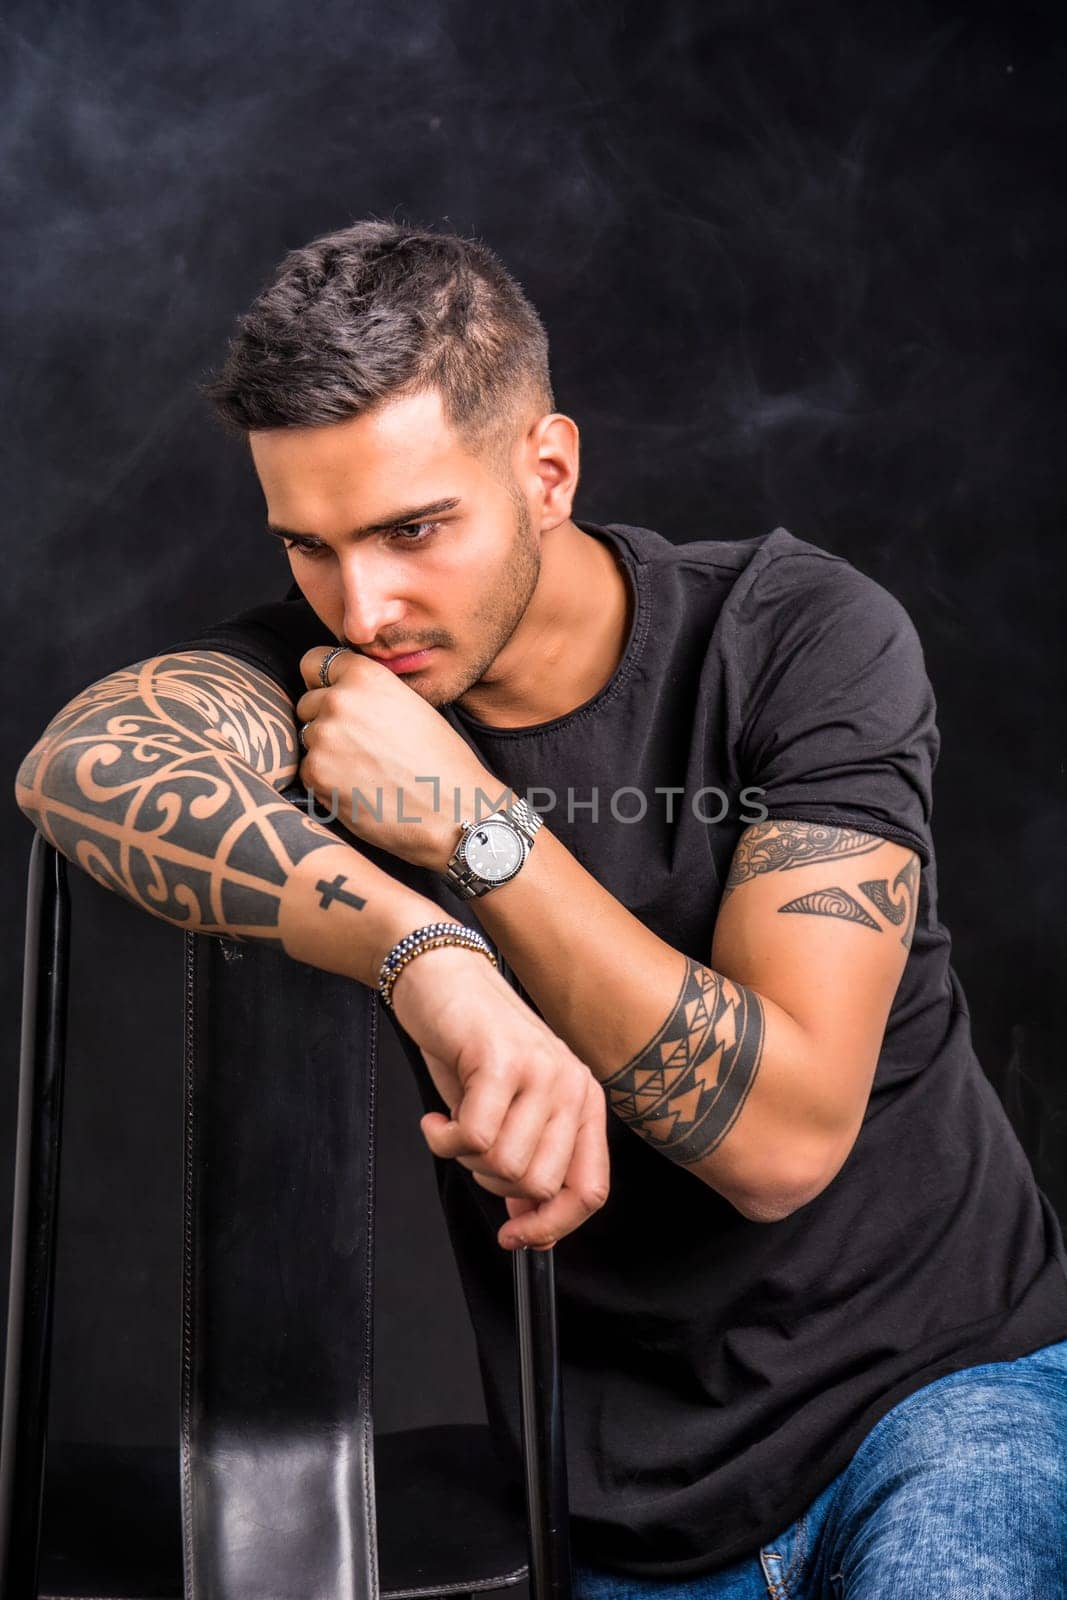 Photo of a man with vibrant tattoos sitting on a stylish chair by artofphoto